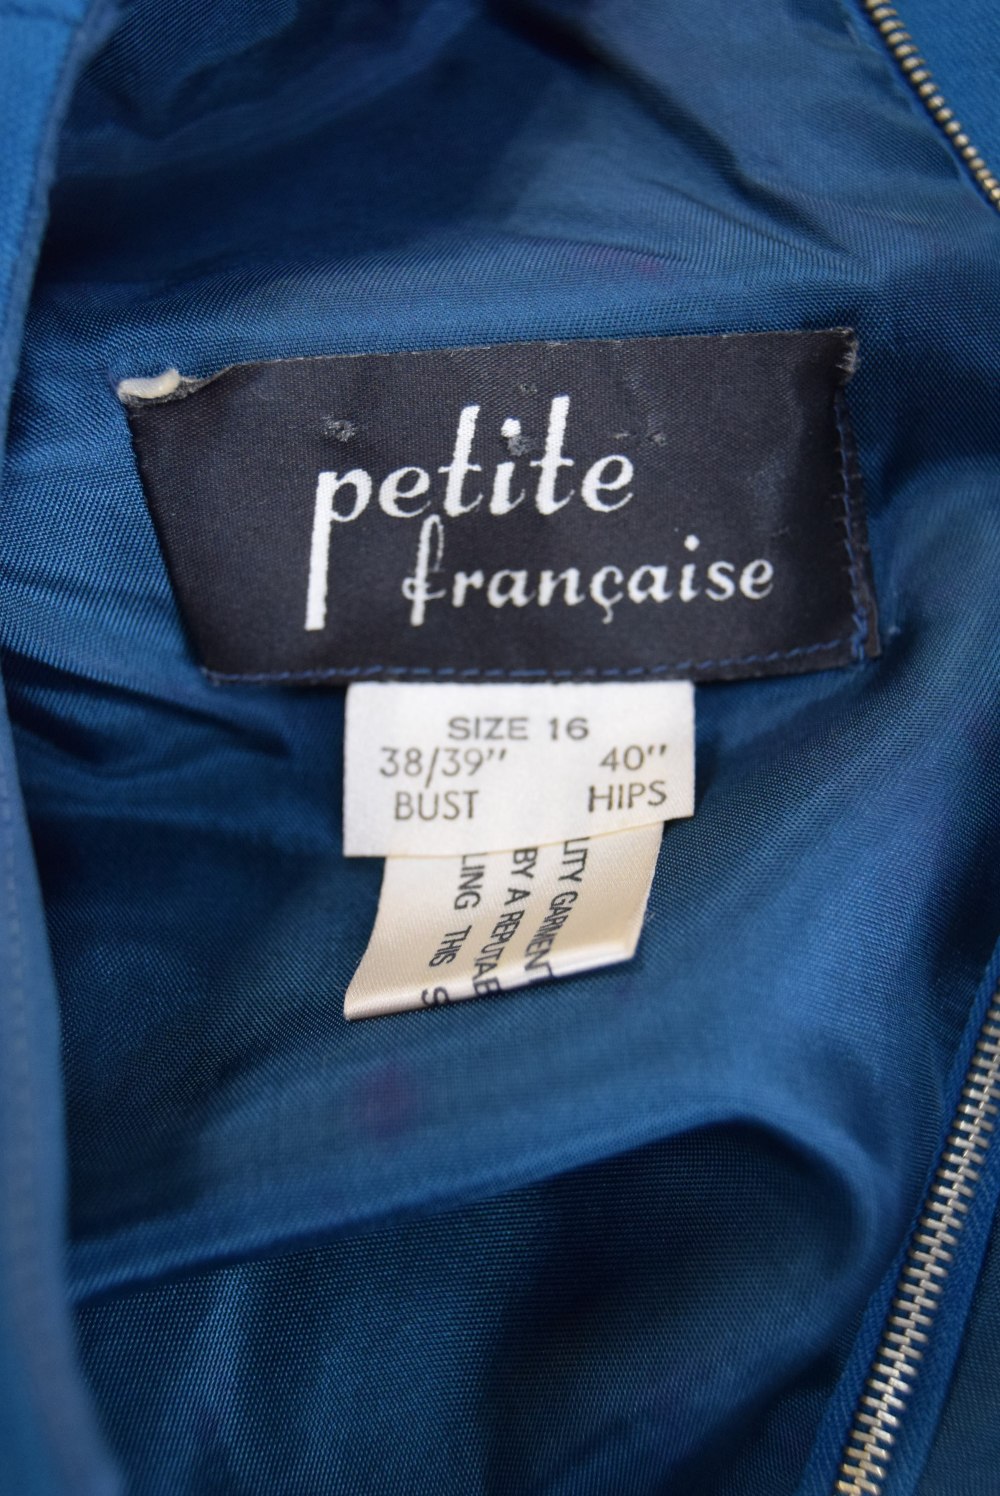 PETIT FRANCAIS; A LADIES VINTAGE 'TEAL' COLOURED DRESS, matching 3/4 sleeve coat, circa 1960's - Image 3 of 3